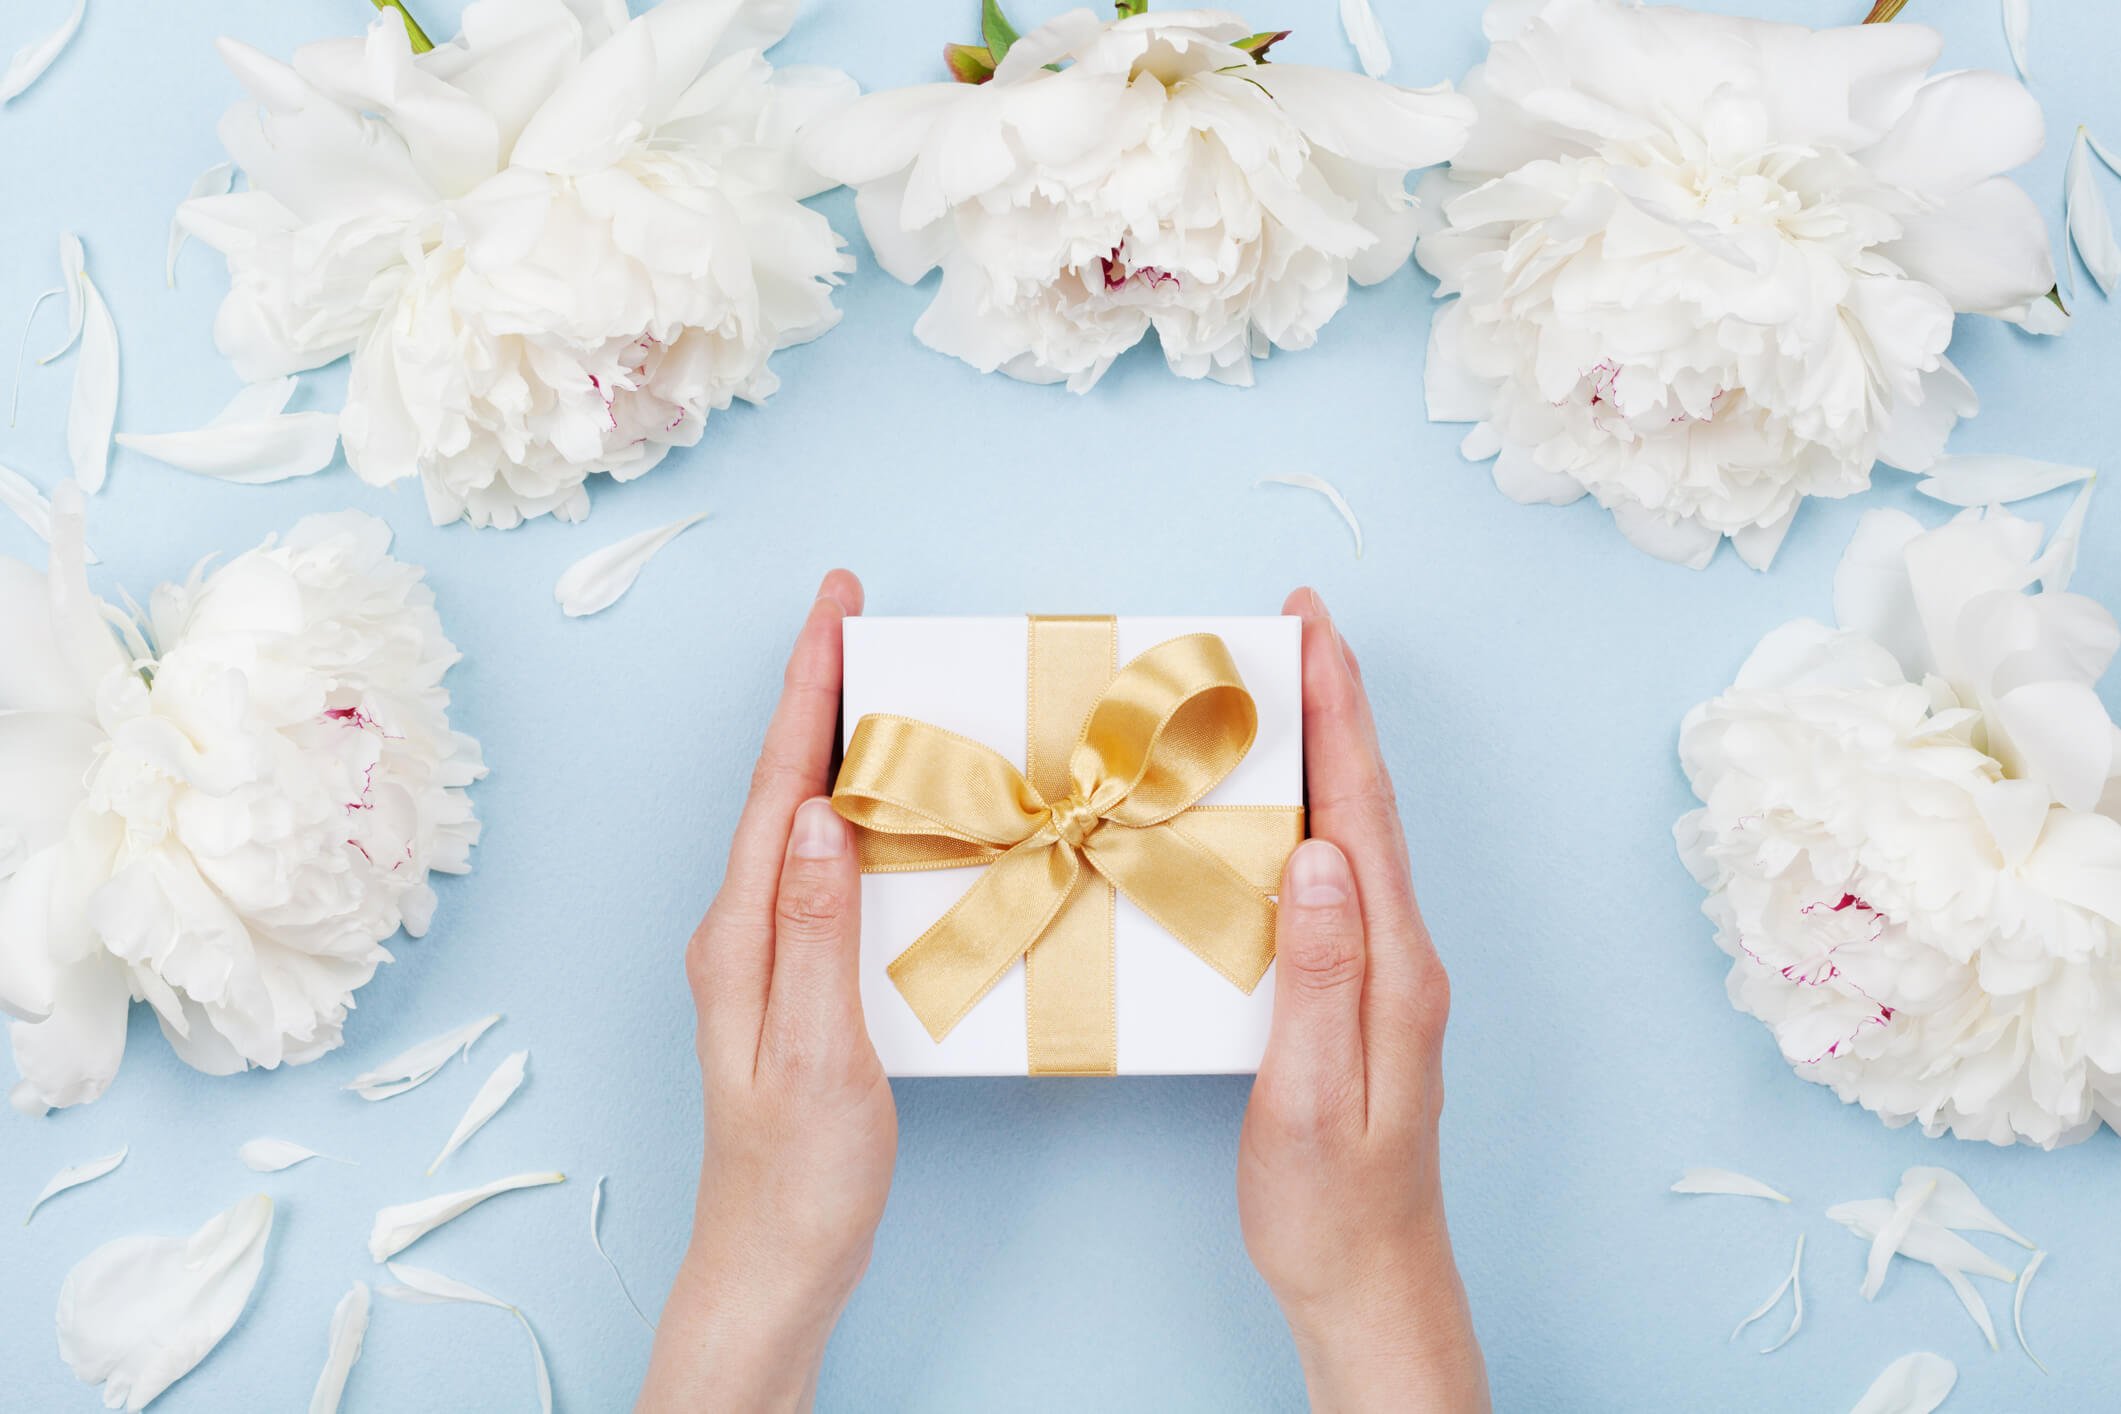 How much should I spend on a wedding gift?